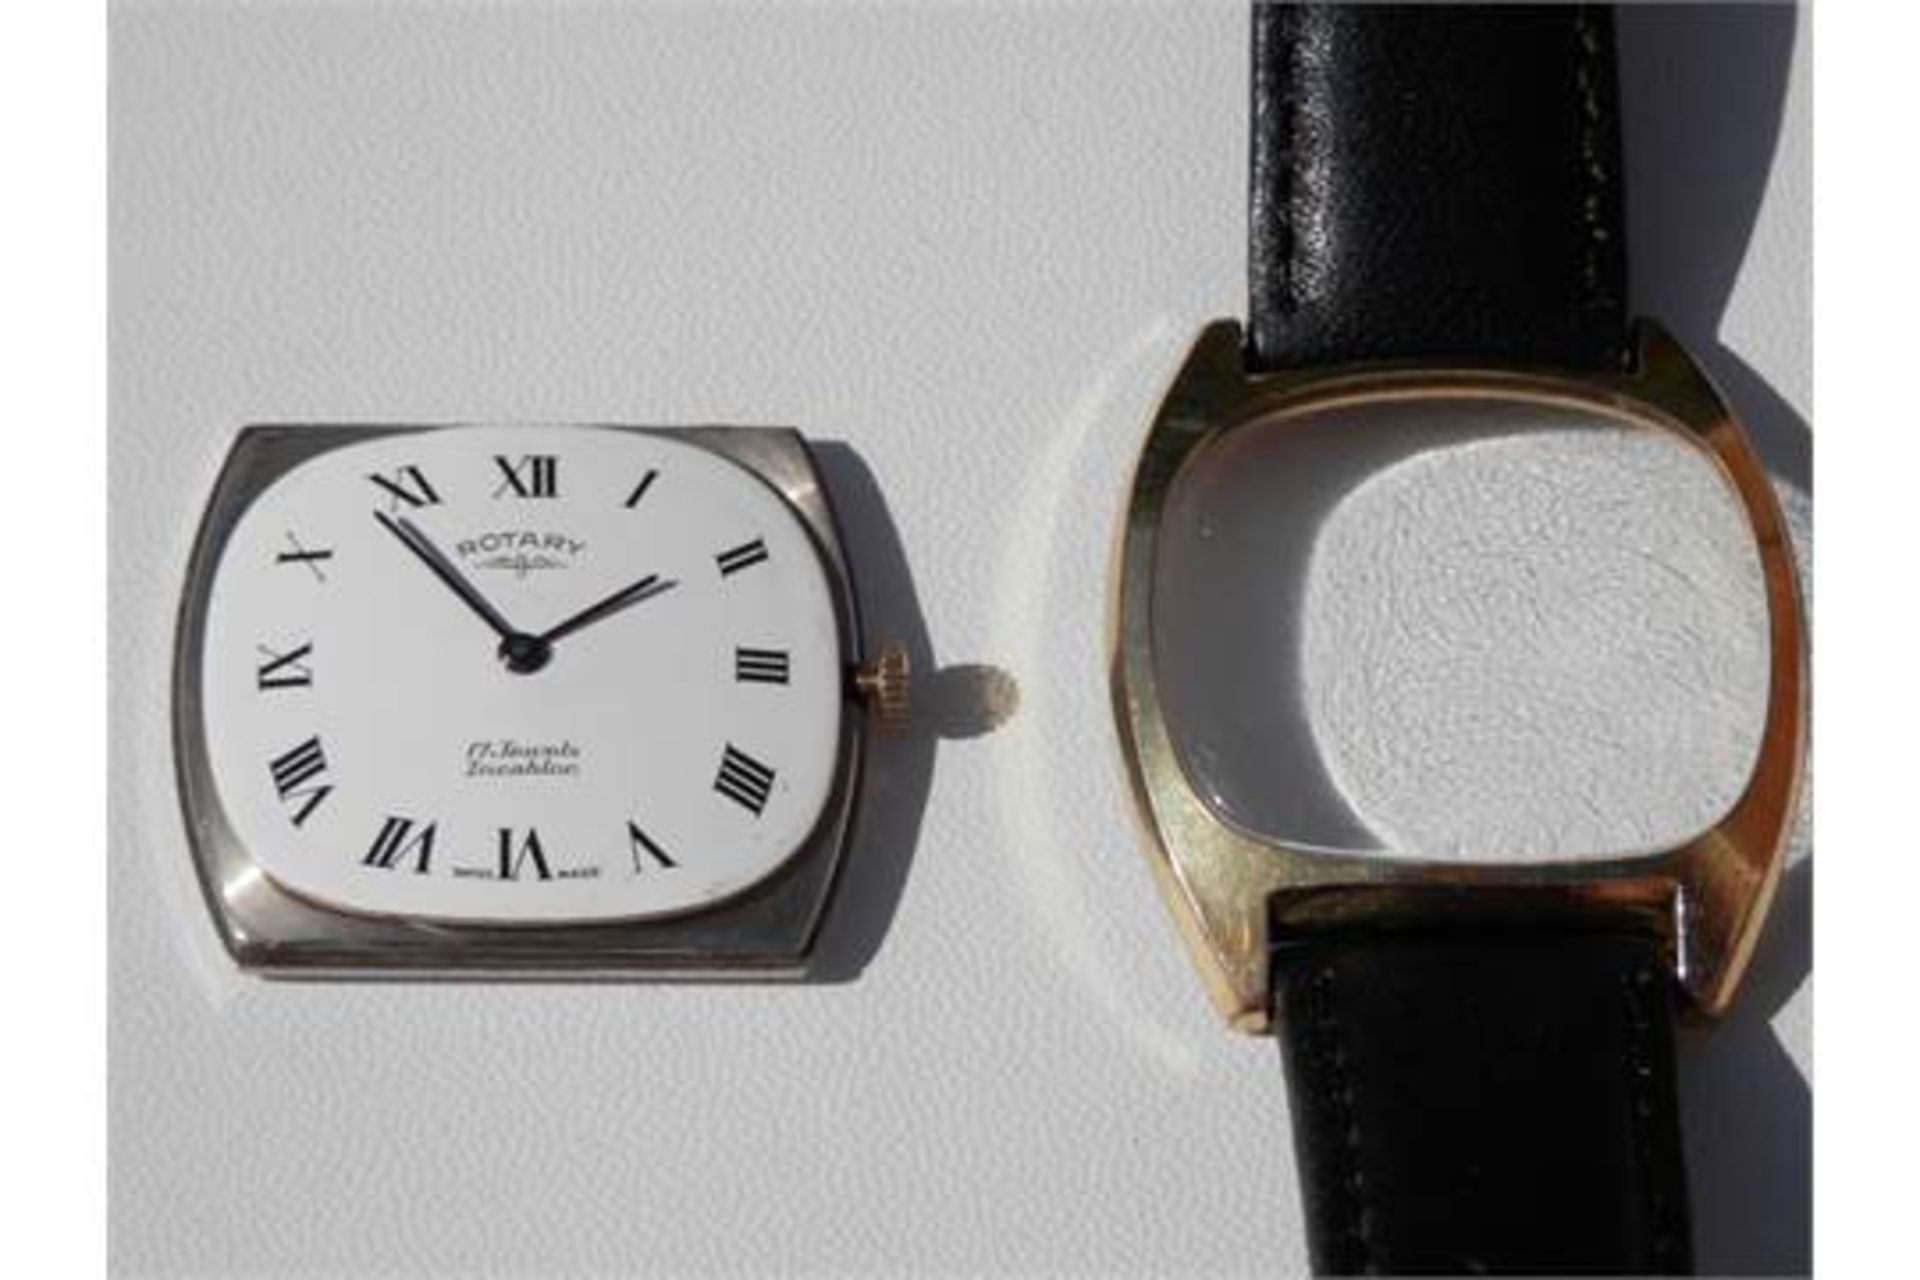 1960S VINTAGE GENTS ROTARY 17 JEWEL SWISS MADE INCABLOC HAND WIND WORKING WATCH, JUST SERVICED. - Image 2 of 15